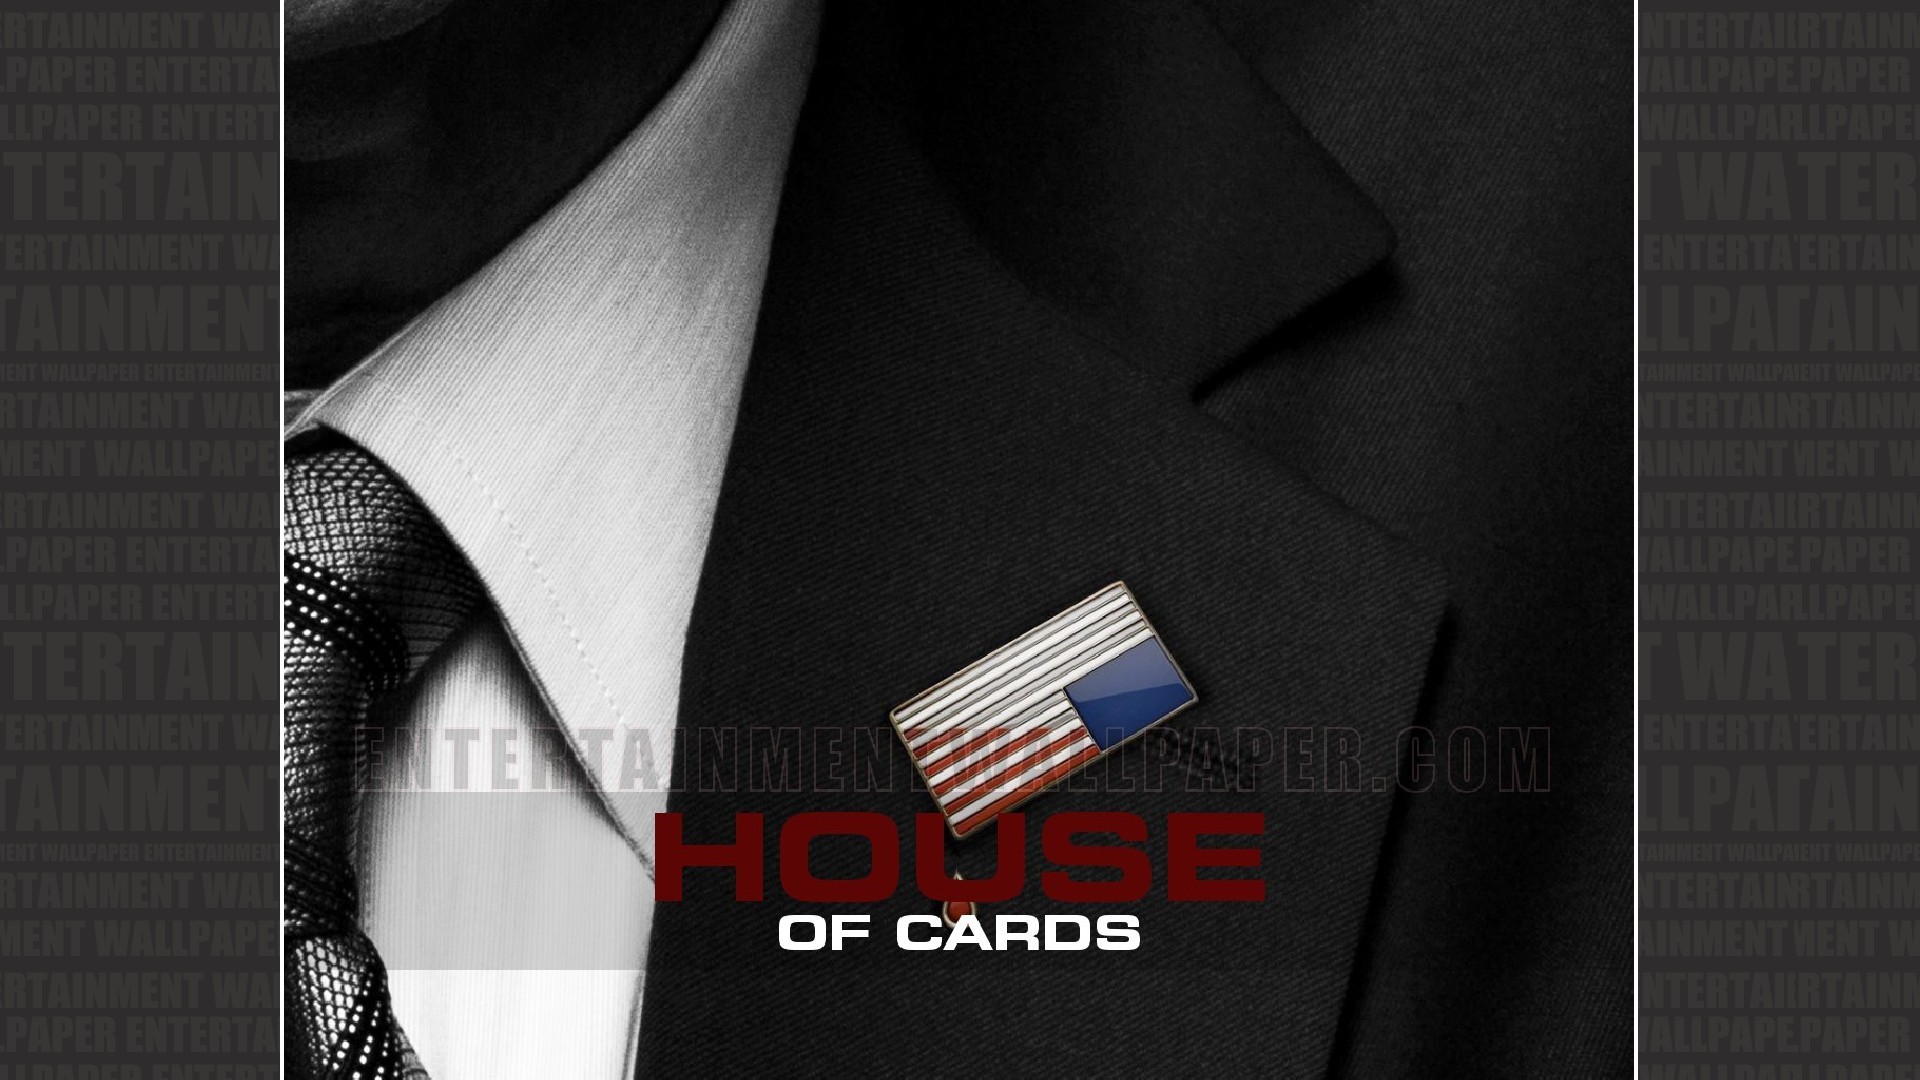 1920x1080 House of Cards Wallpaper - Original size, download now.